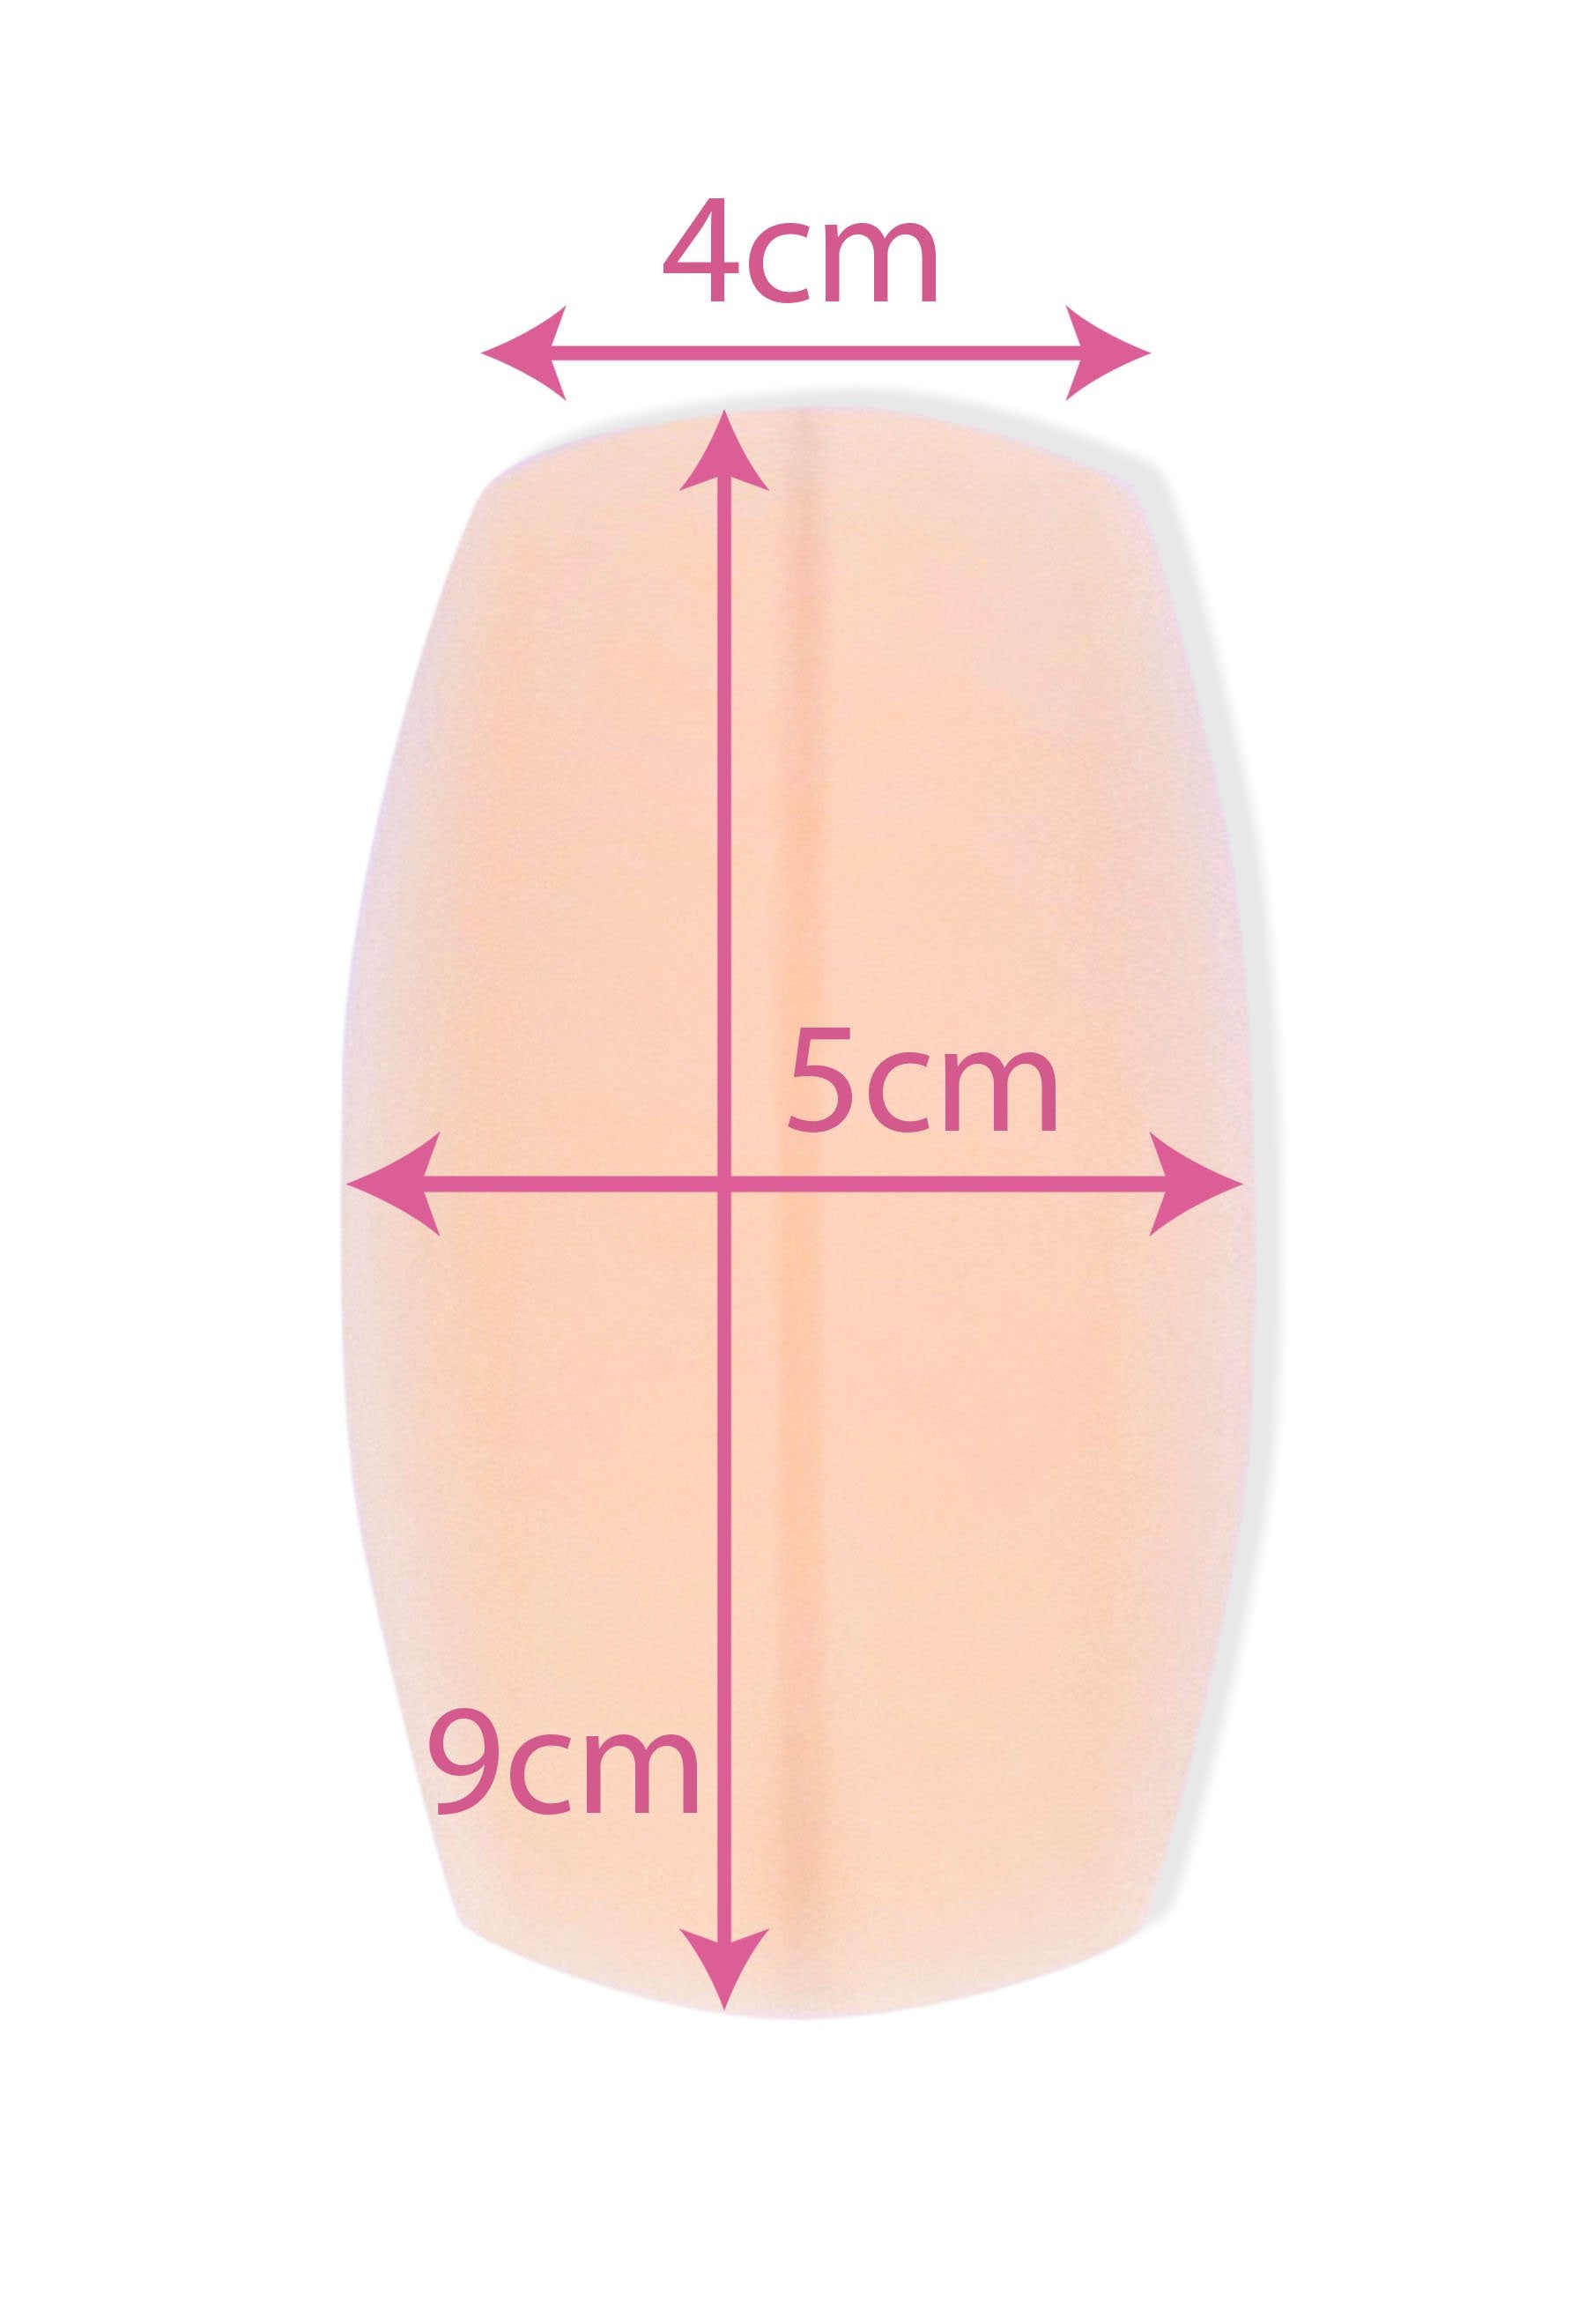 SILICONE BRA STRAP CUSHIONS PROTECT YOUR SHOULDERS BY PROVIDING RELIEF FROM  ANY BRA STRAPS PACK OF 4